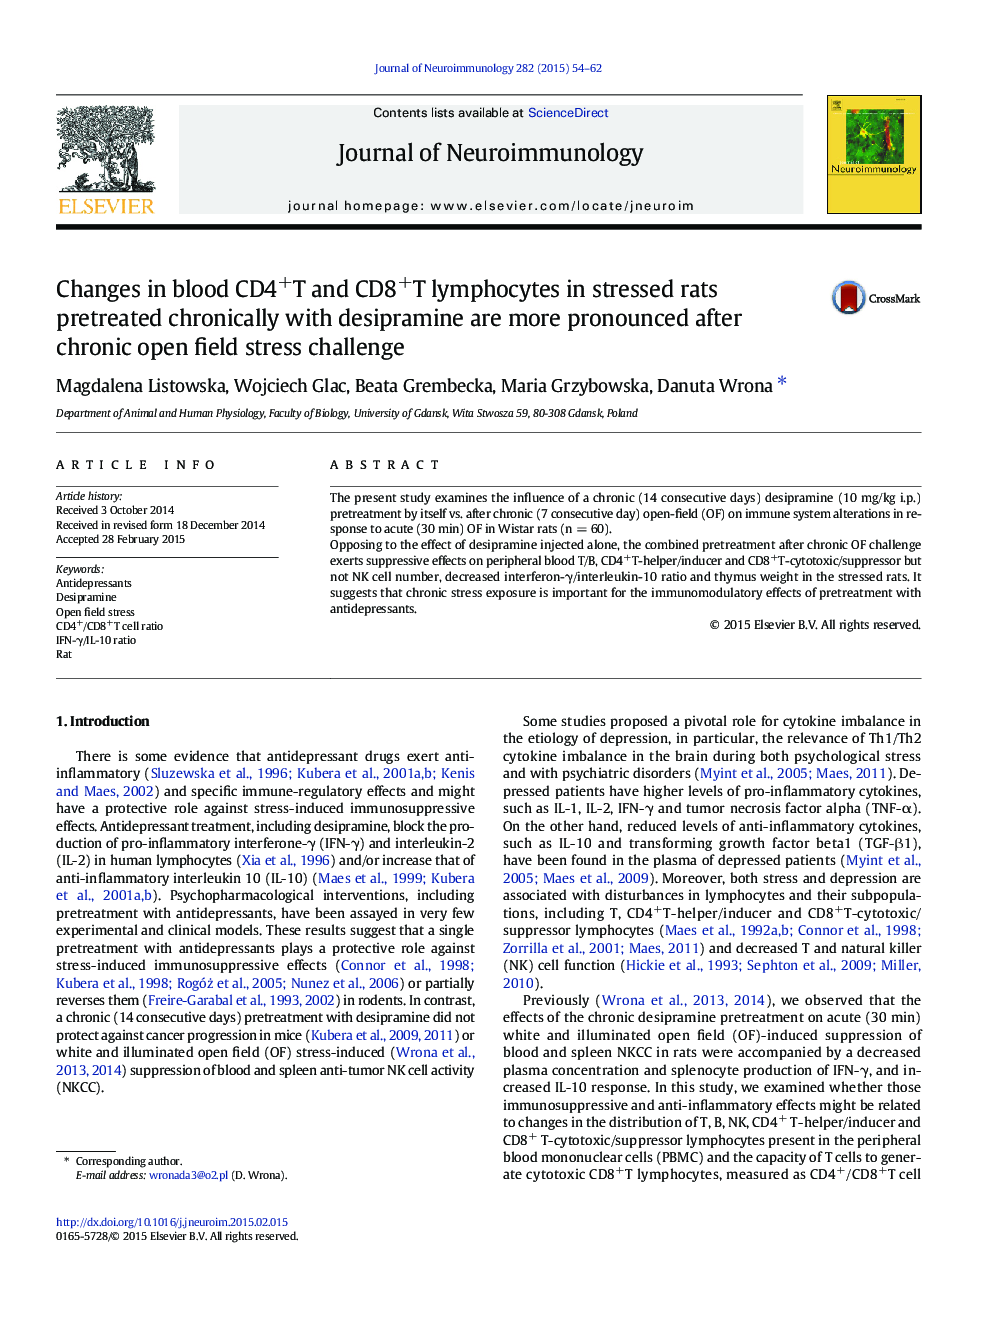 Changes in blood CD4+T and CD8+T lymphocytes in stressed rats pretreated chronically with desipramine are more pronounced after chronic open field stress challenge